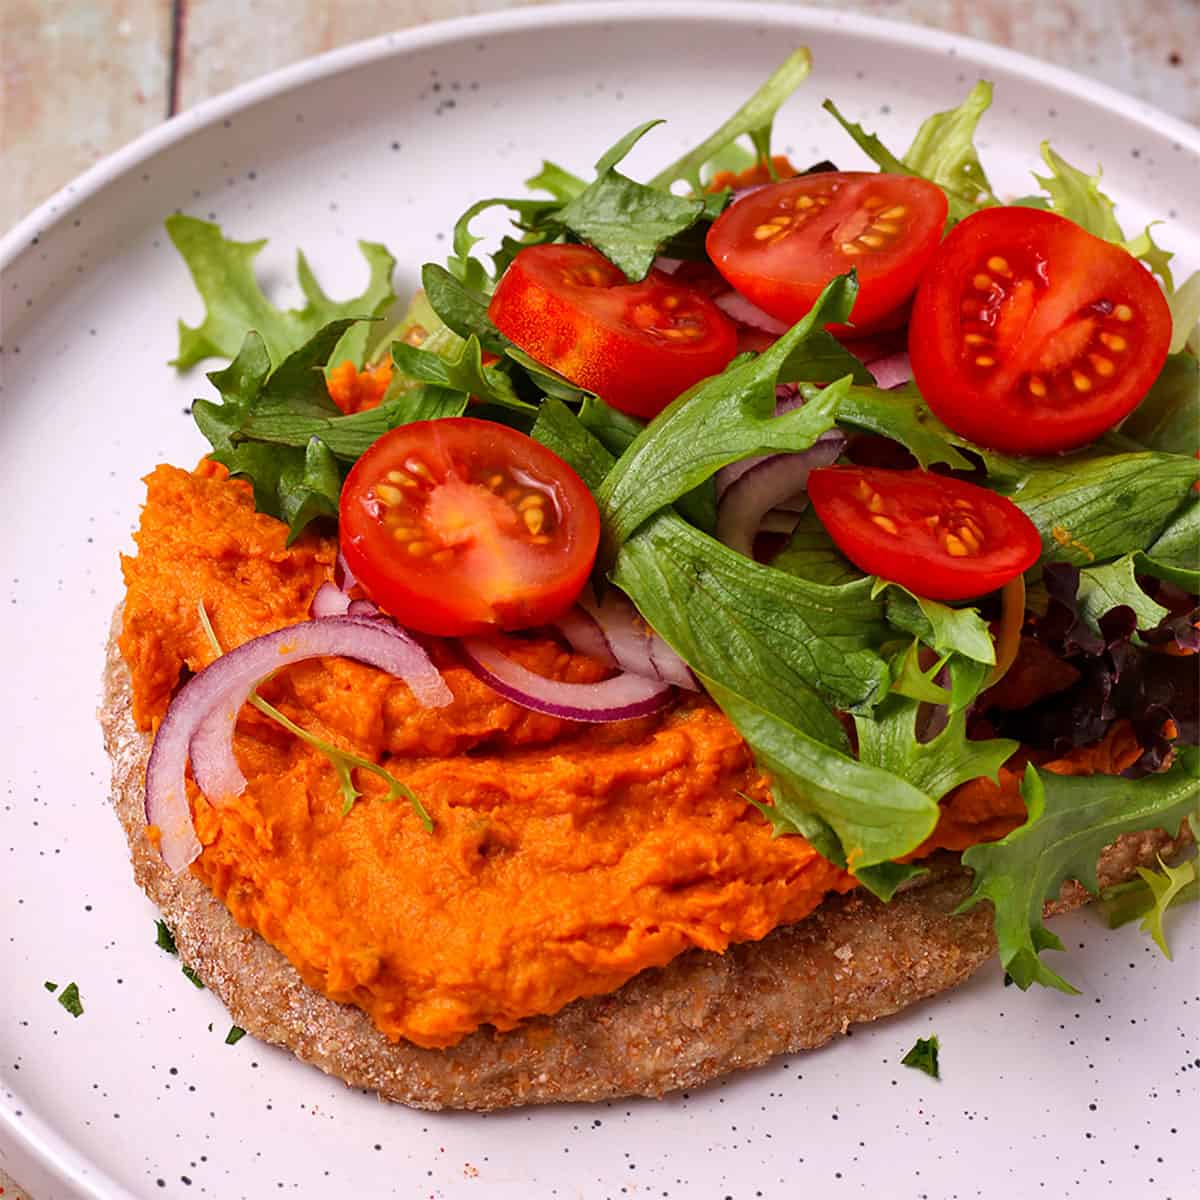 Sweet potato dip is spread on a flatbread with red onions, lettuce, and sliced tomatoes.